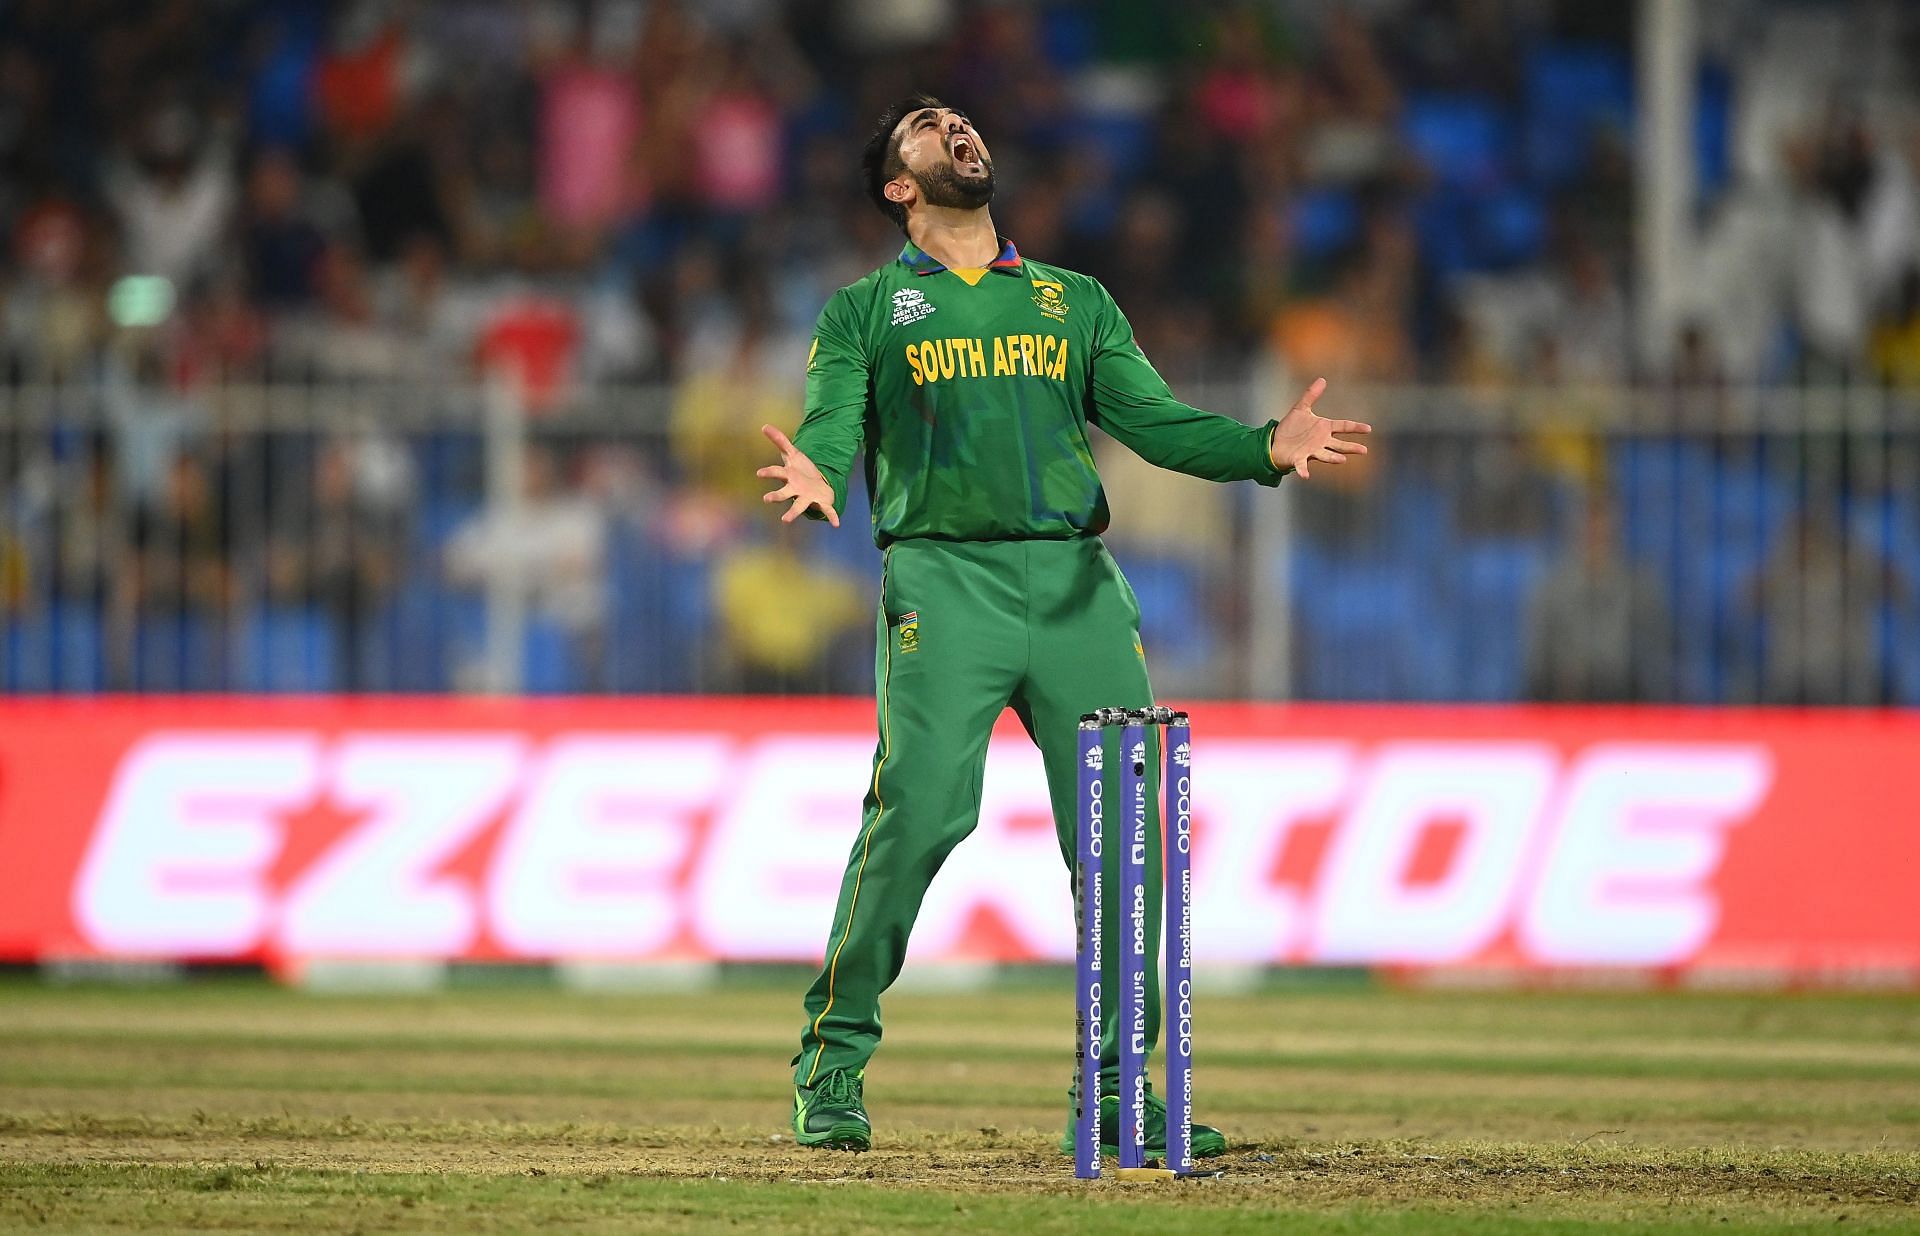 Tabraiz Shamsi is among the top-ranked T20 bowlers. Pic: Getty Images